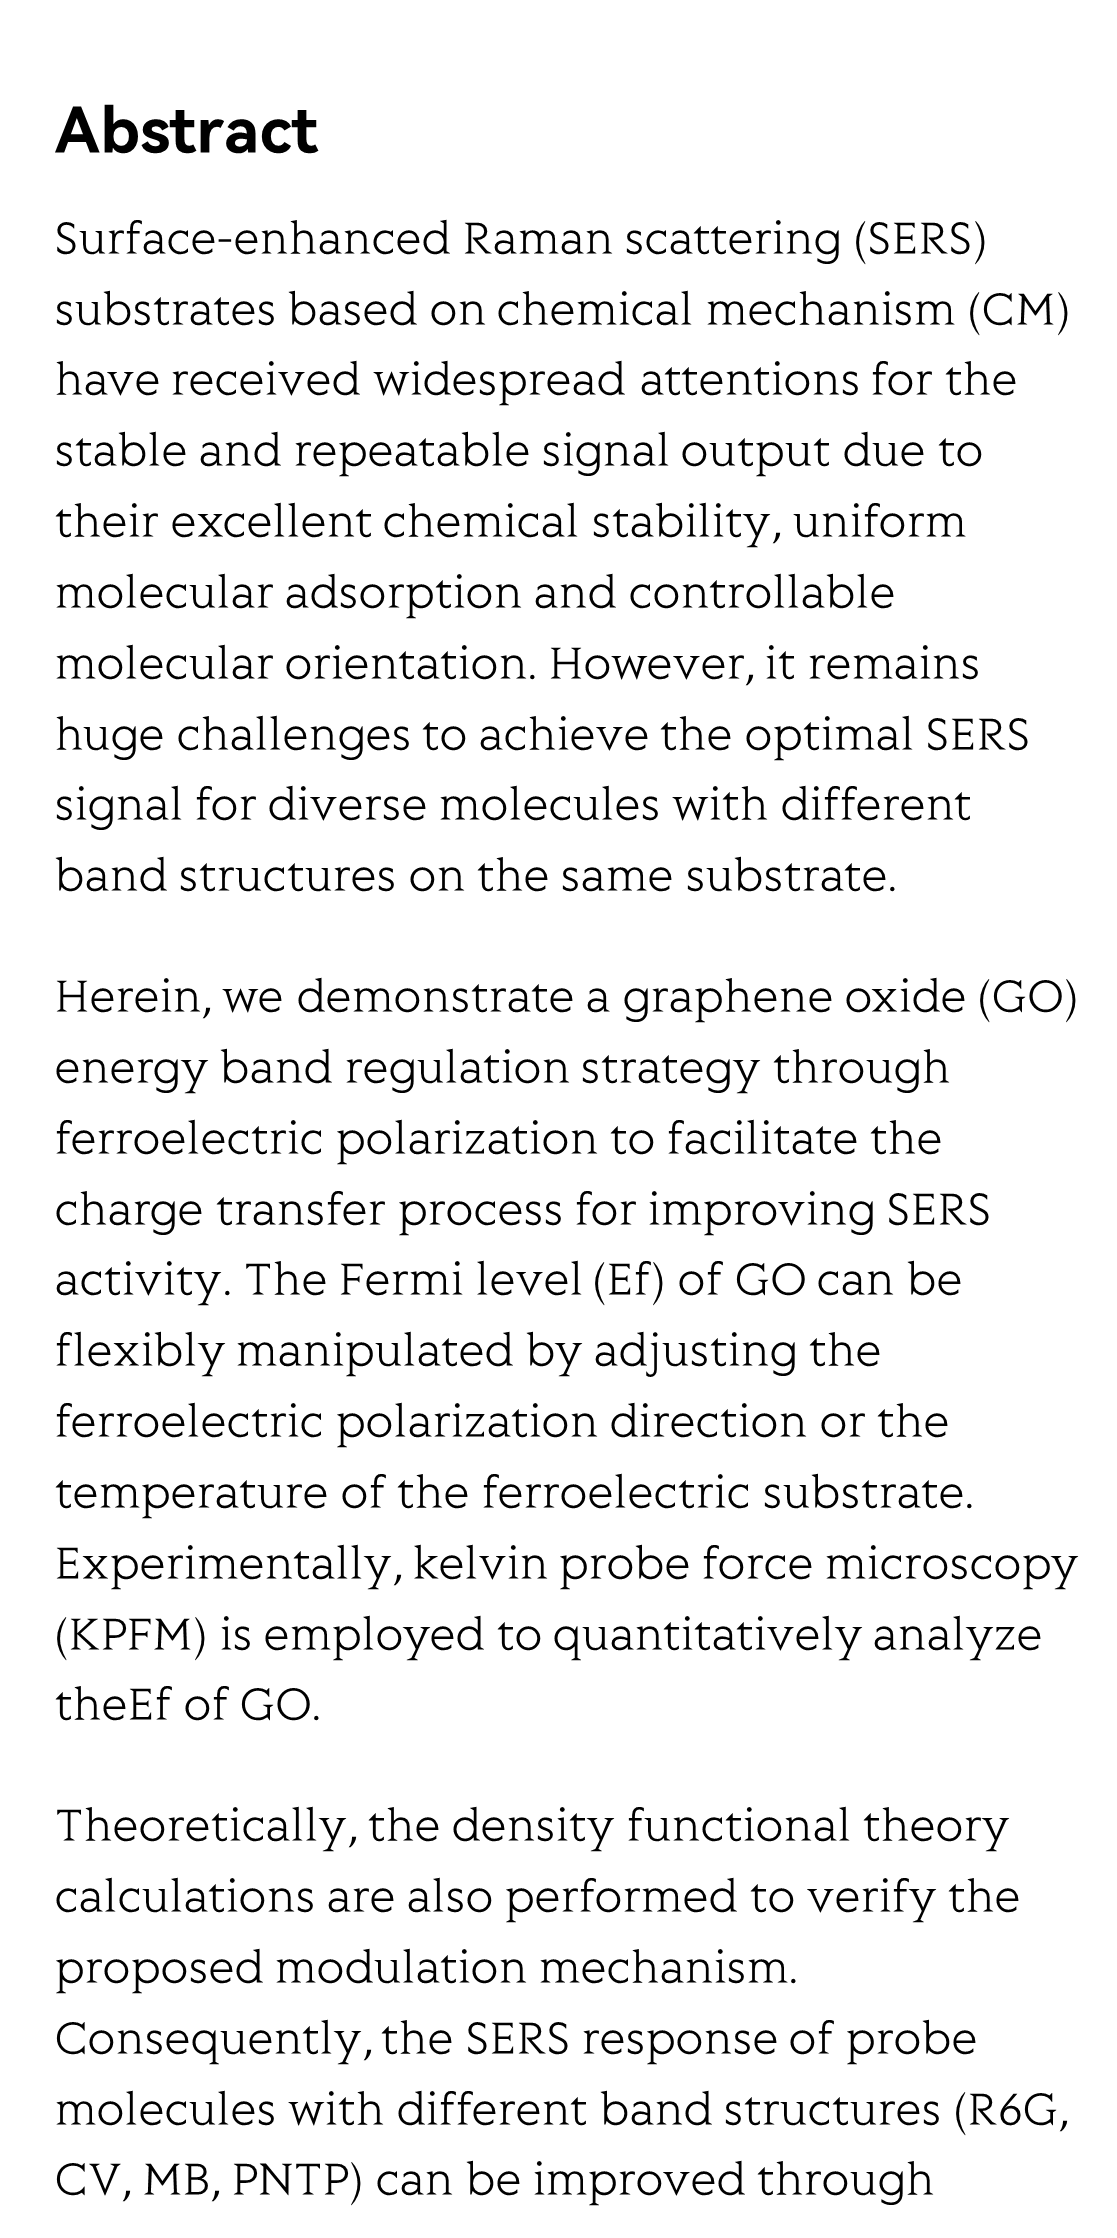 Ferroelectrically modulate the Fermi level of graphene oxide to enhance SERS response_2